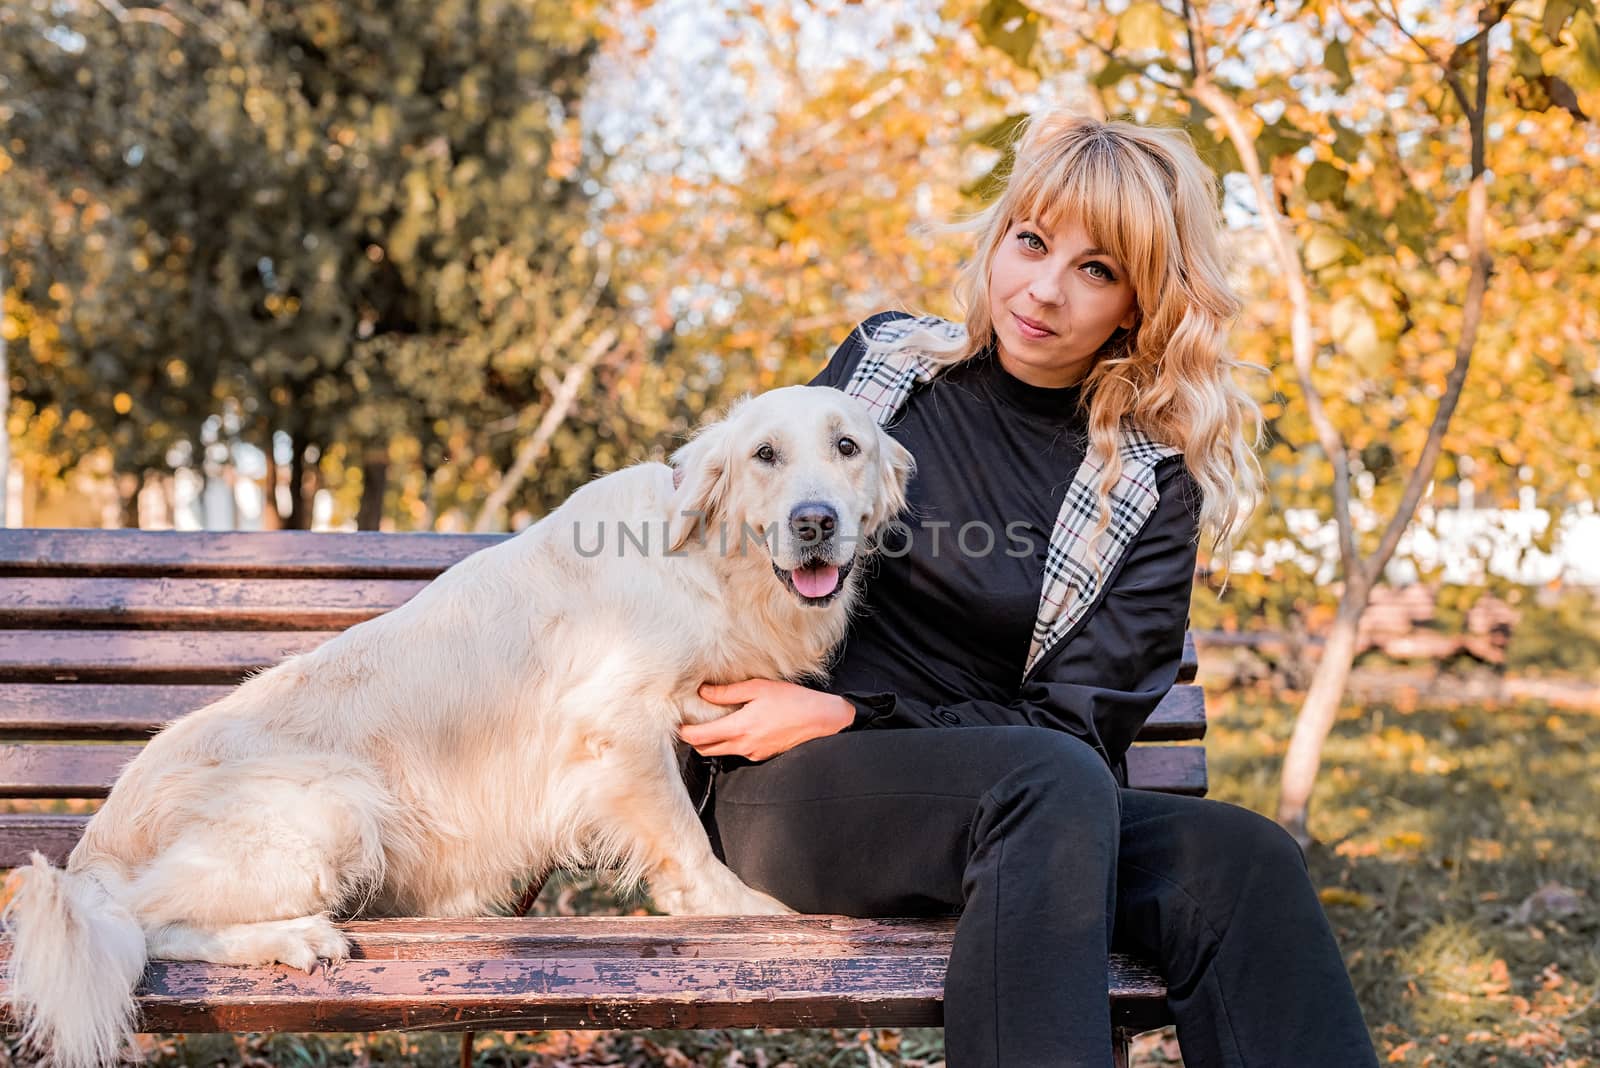 Pet care concept. Young blond woman with her retriever dog on the bencj in the park